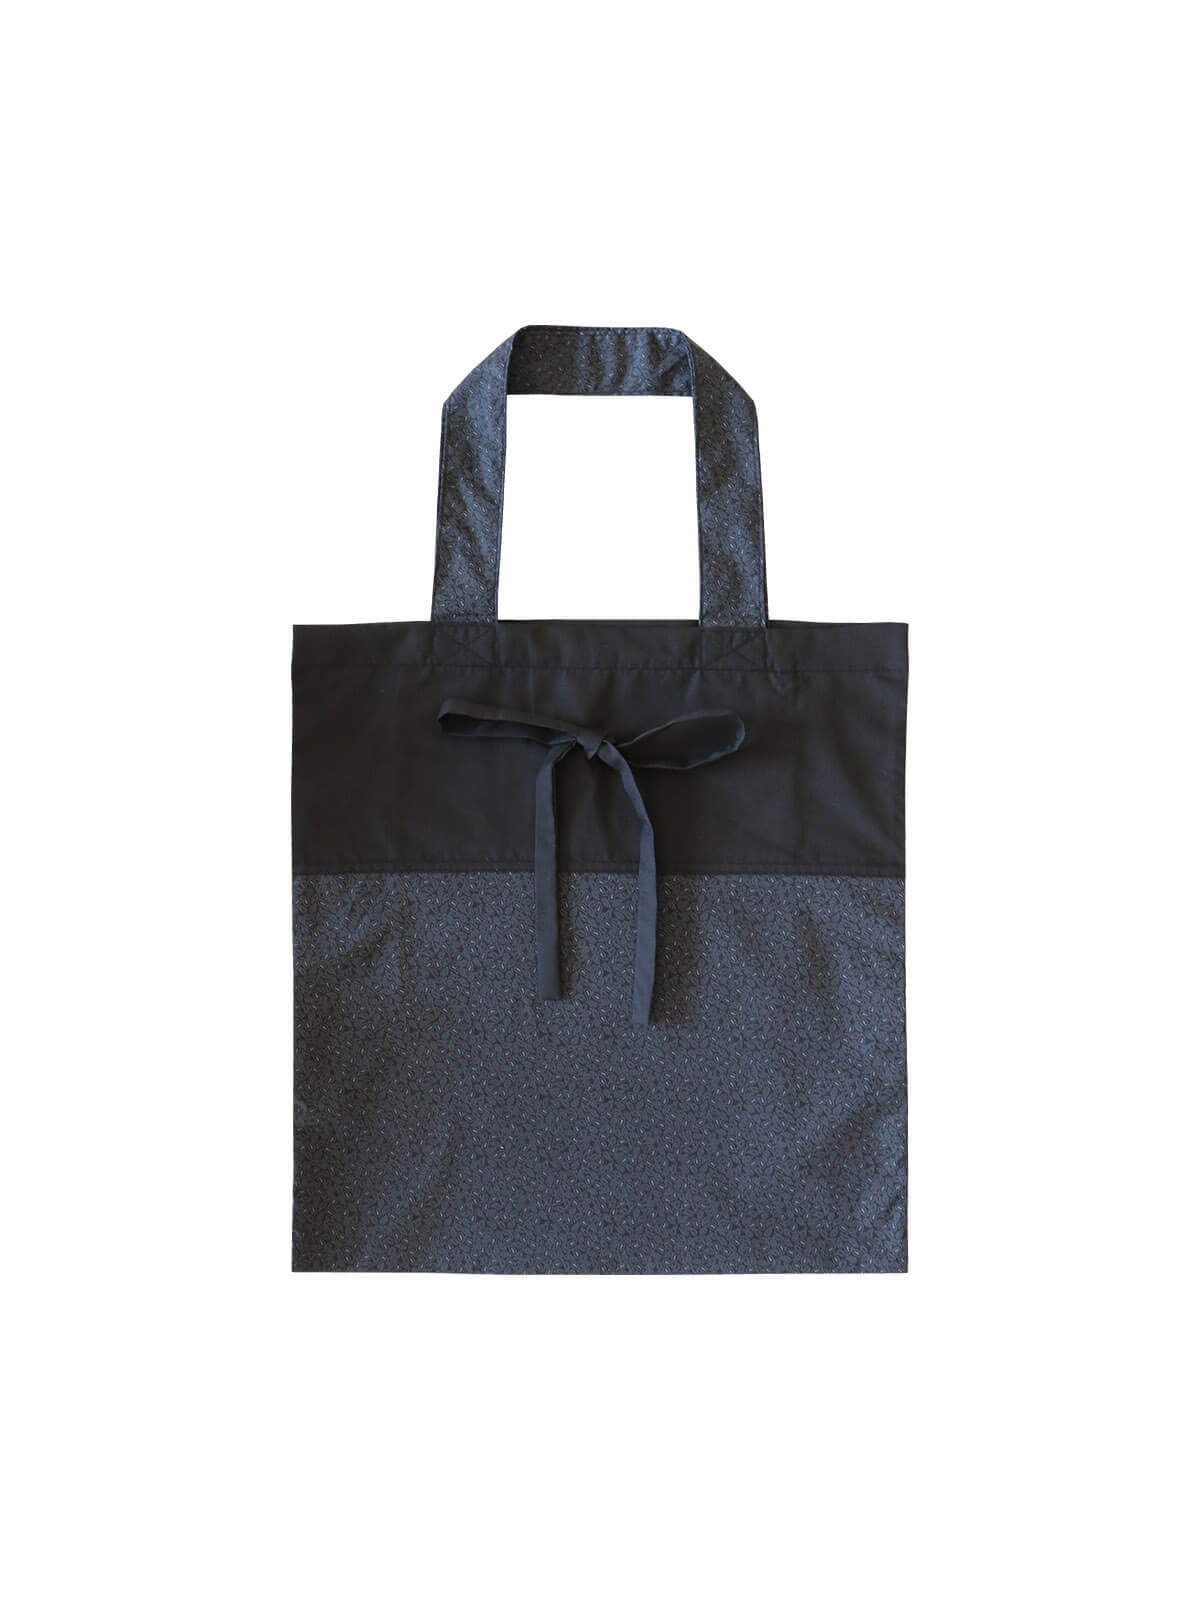 Black foldable tote bag, upcycled cotton, Mitzie Mee Shop